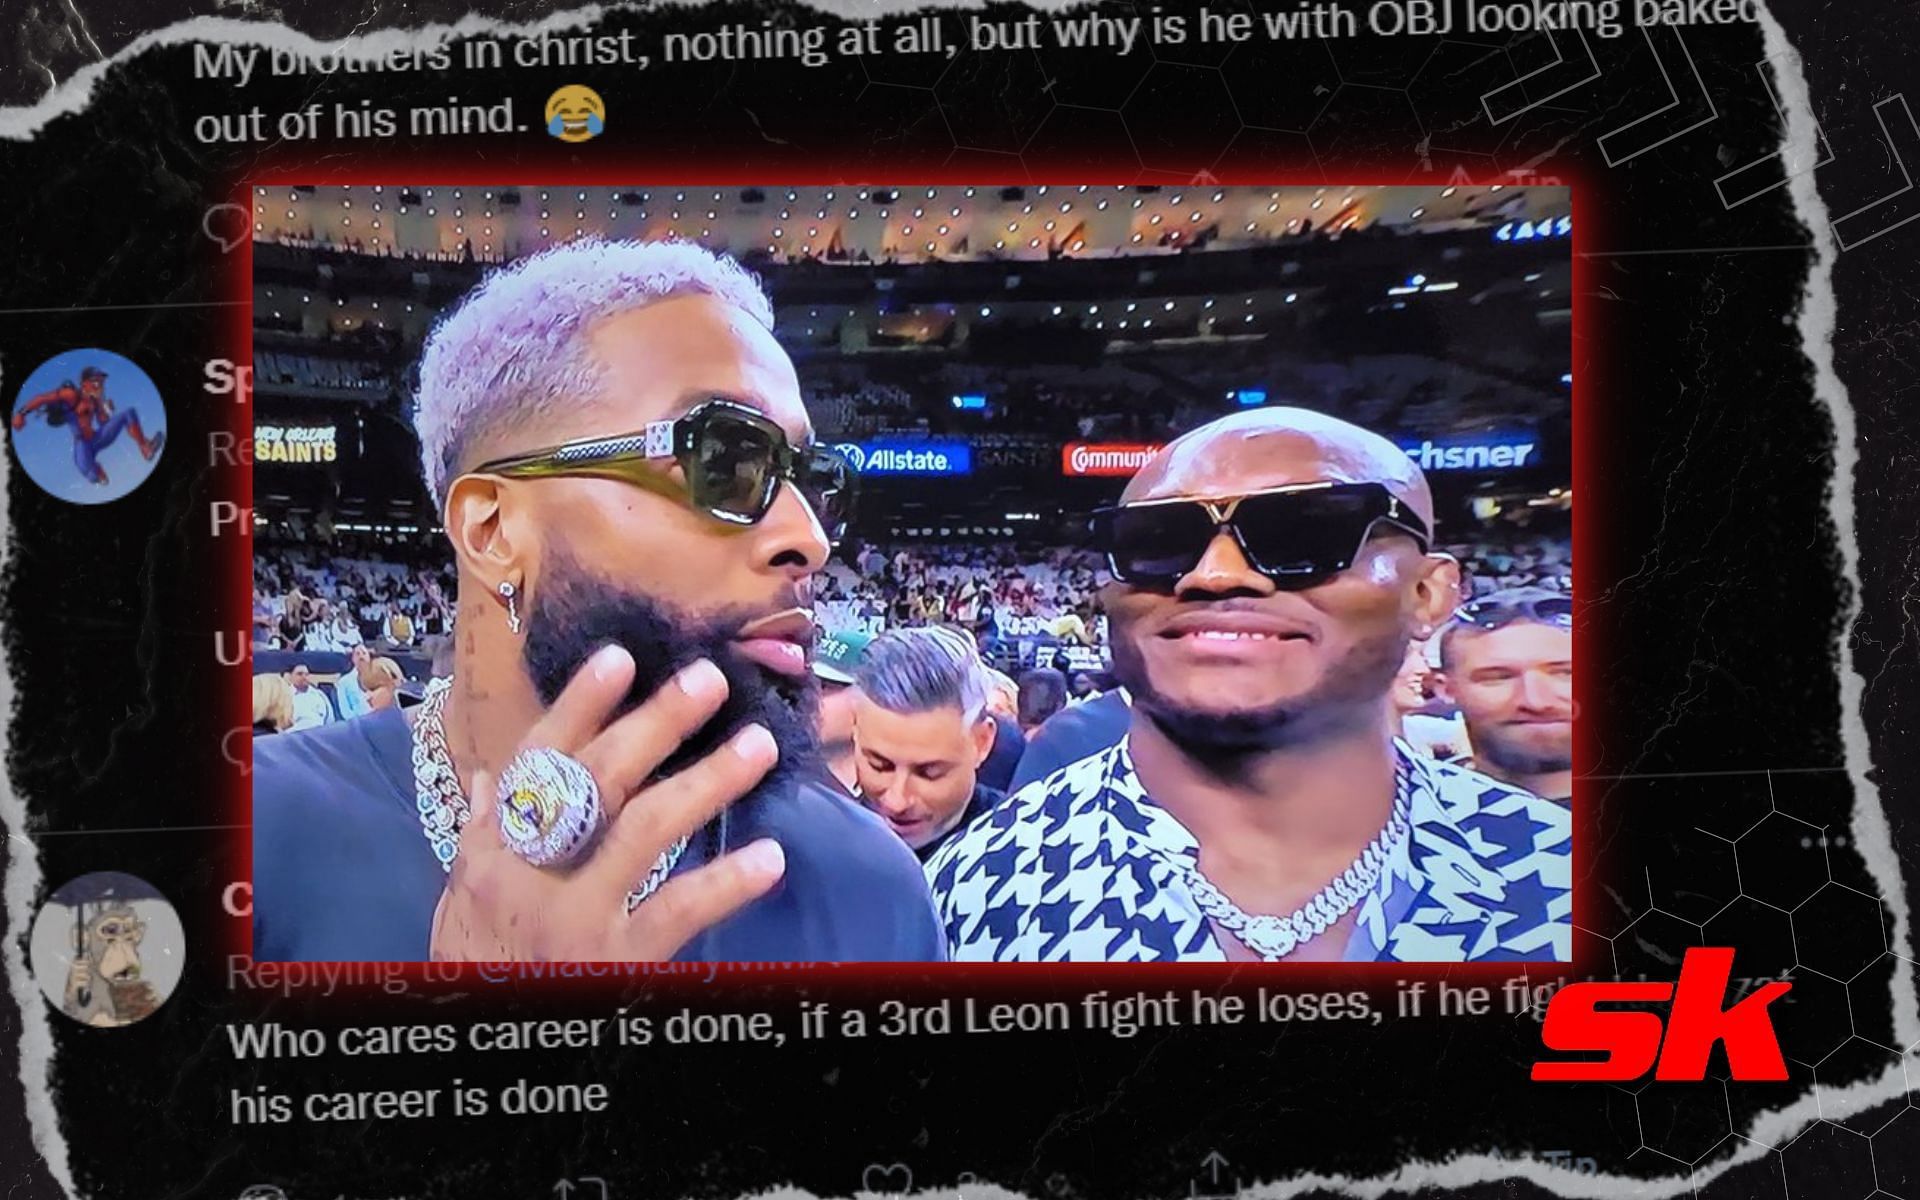 Fans react to Kamaru Usman and Odell Beckham Jr. hanging out at New Orleans Saints vs Tampa Bay Buccaneers.[Image credits: @MacMally on twitter]